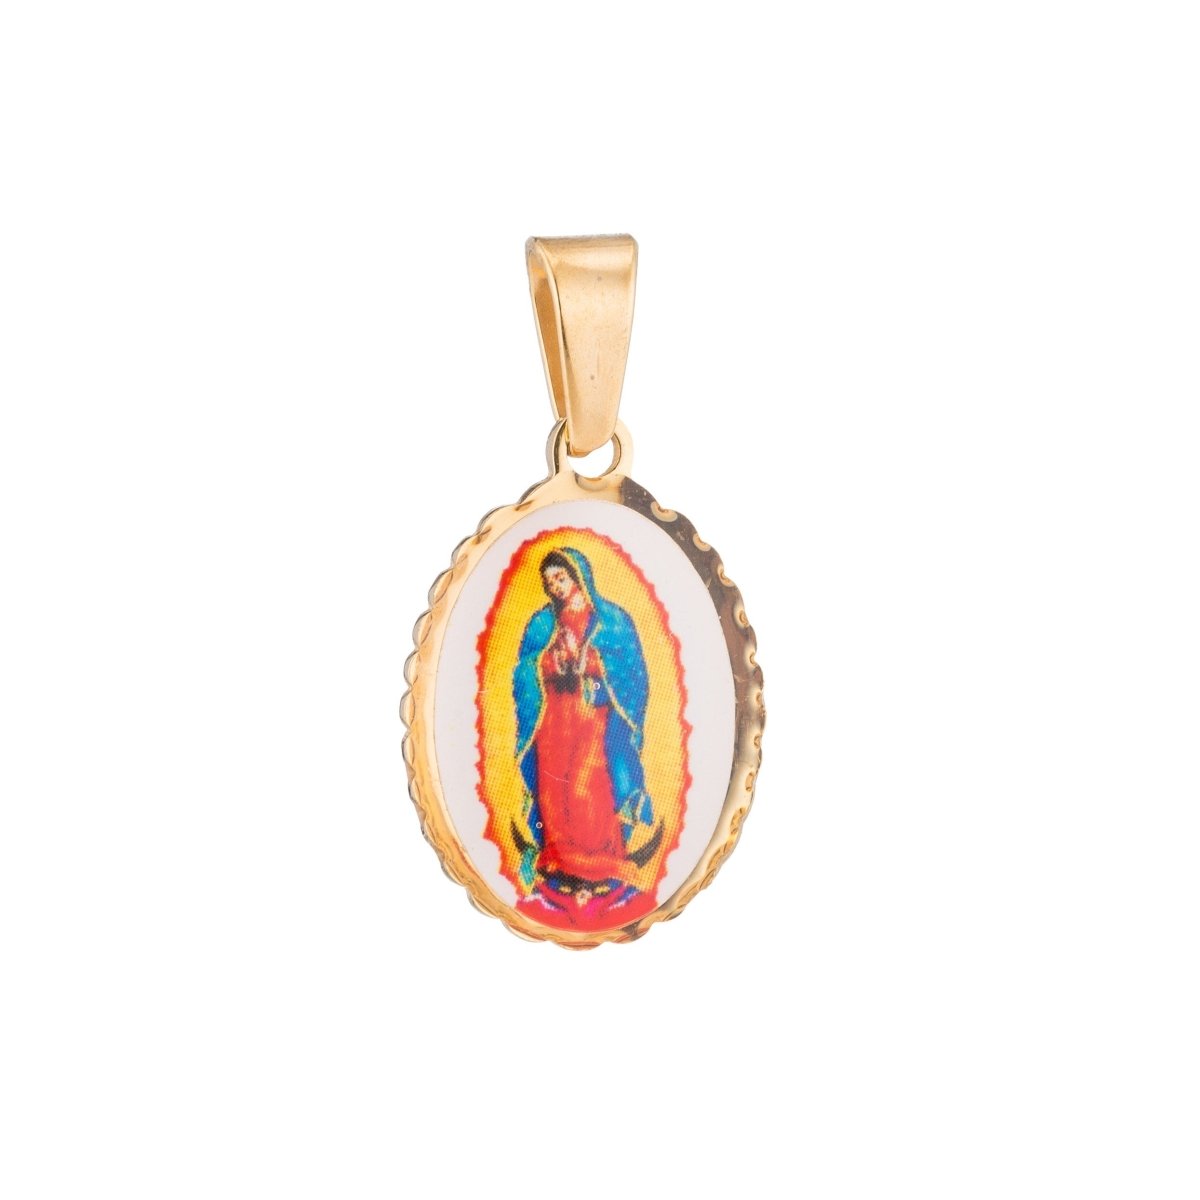 Stainless Steel Holy Mother Virgin Mary Pray for Us Praying Novena Bracelet Necklace Pendant Charm Bead Bails Finding for Jewelry Making J-487 - DLUXCA